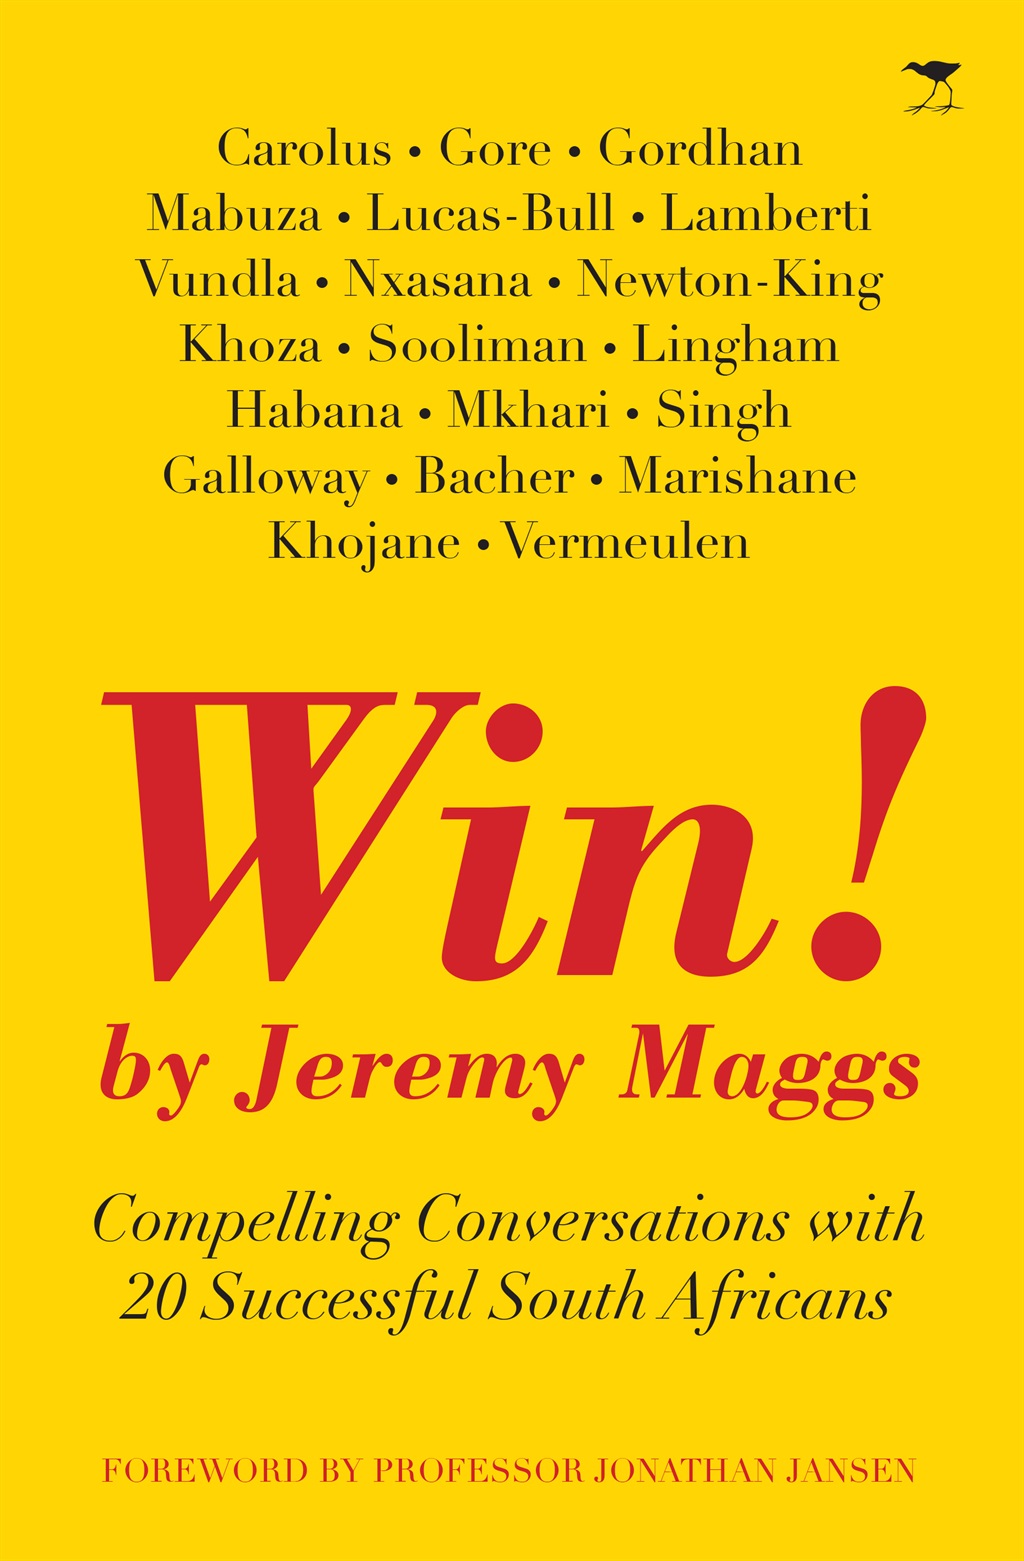 Win! Compelling Conversations with 20 Successful South Africans by Jeremy Maggs. Published by Jacana Media. Available in all good bookstores. Recommended retail price: R240